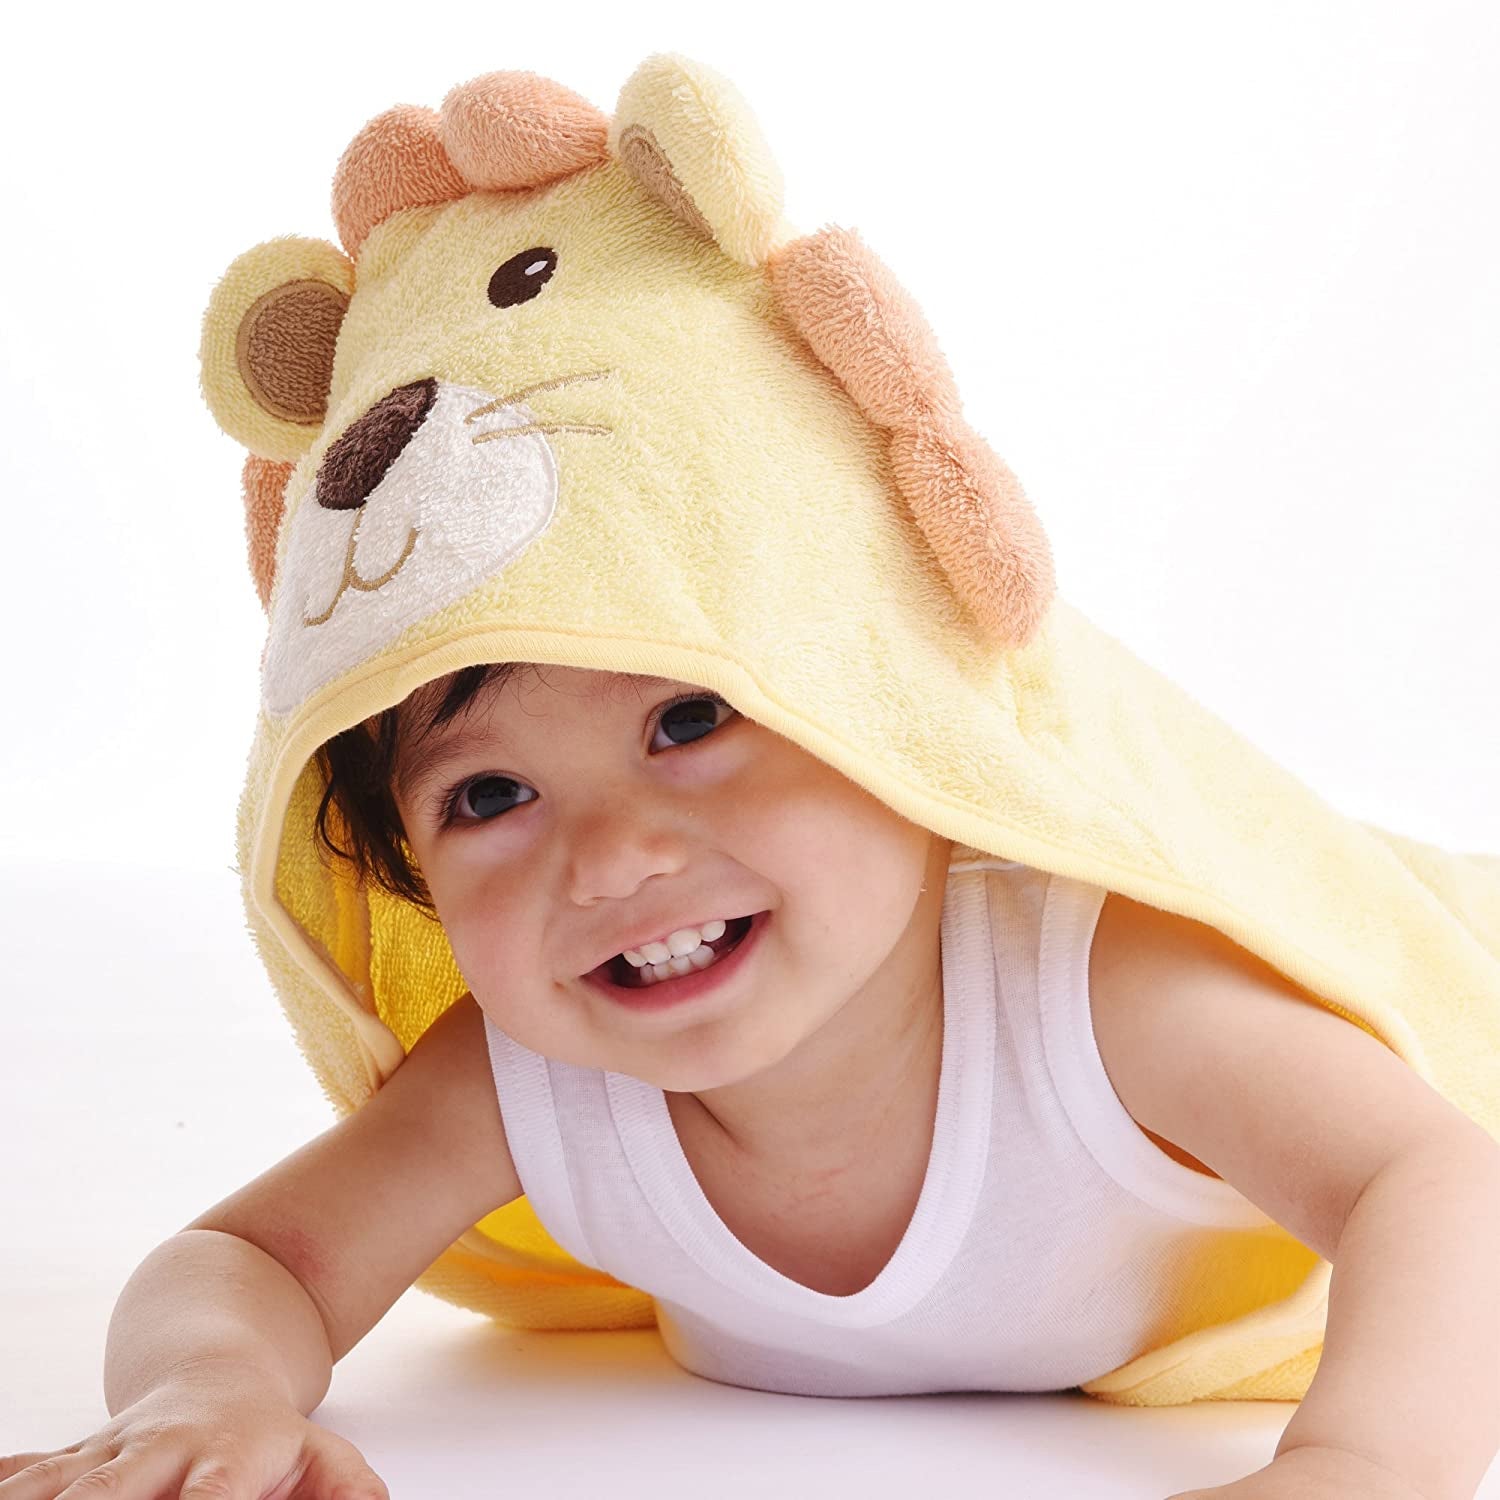 Hudson Baby Unisex Baby Cotton Animal Face Hooded Towel, Yellow